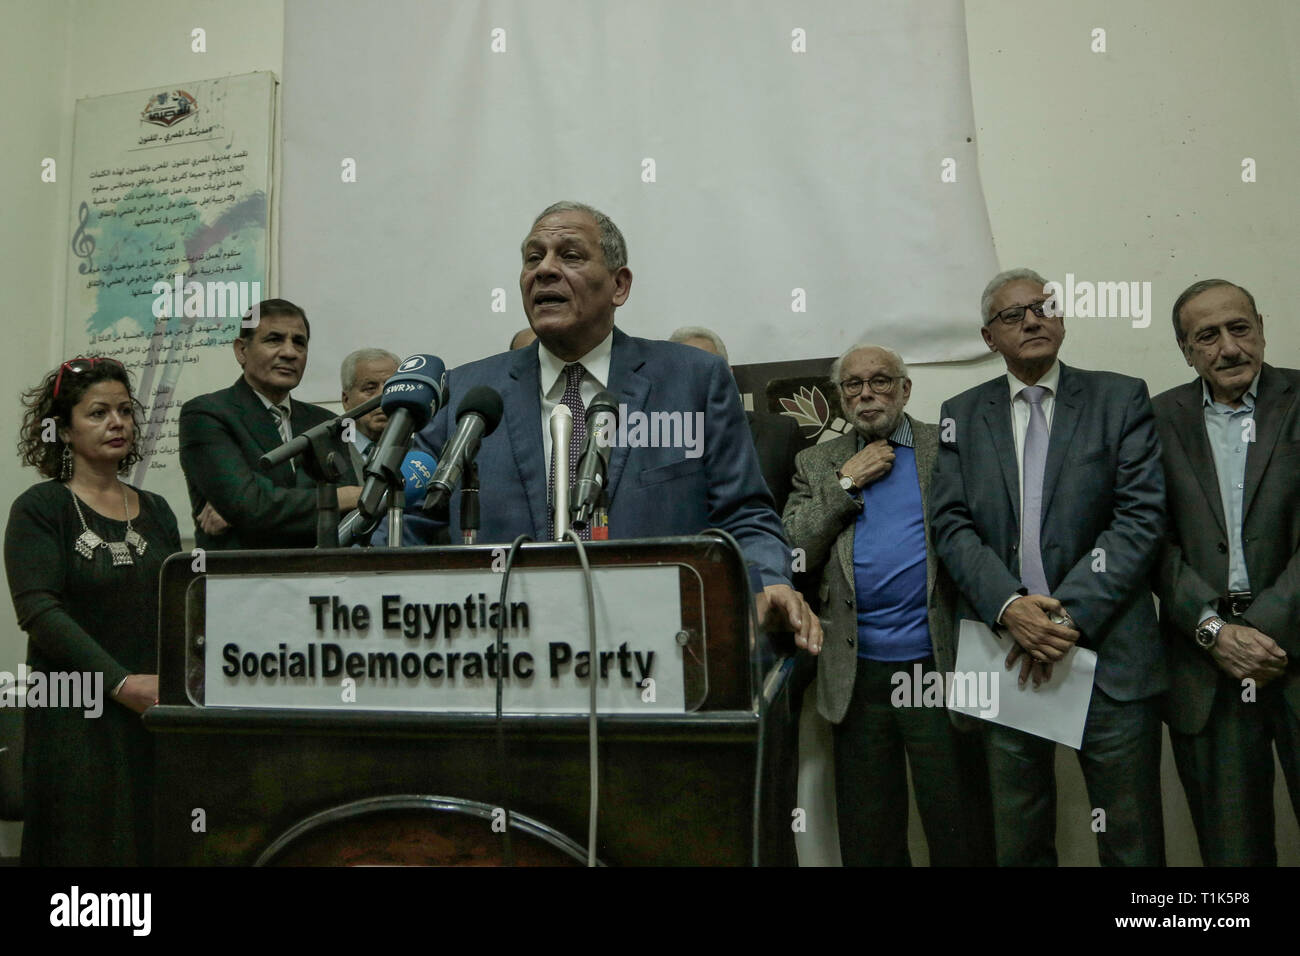 Cairo, Egypt. 27th Mar, 2019. Chairman of the Reform and Development Misruna Party Mohamed Anwar Esmat Al-Sadat speaks during a press conference of the Civil Democratic Movement. Prominent Egyptian political figures spoke for the first time against a constitutional amendment which would allow sitting President Abdel Fattah El-Sisi (not pictured) to extend his term beyond the current cap limit. Credit: Mohamed El Raai/dpa/Alamy Live News Stock Photo